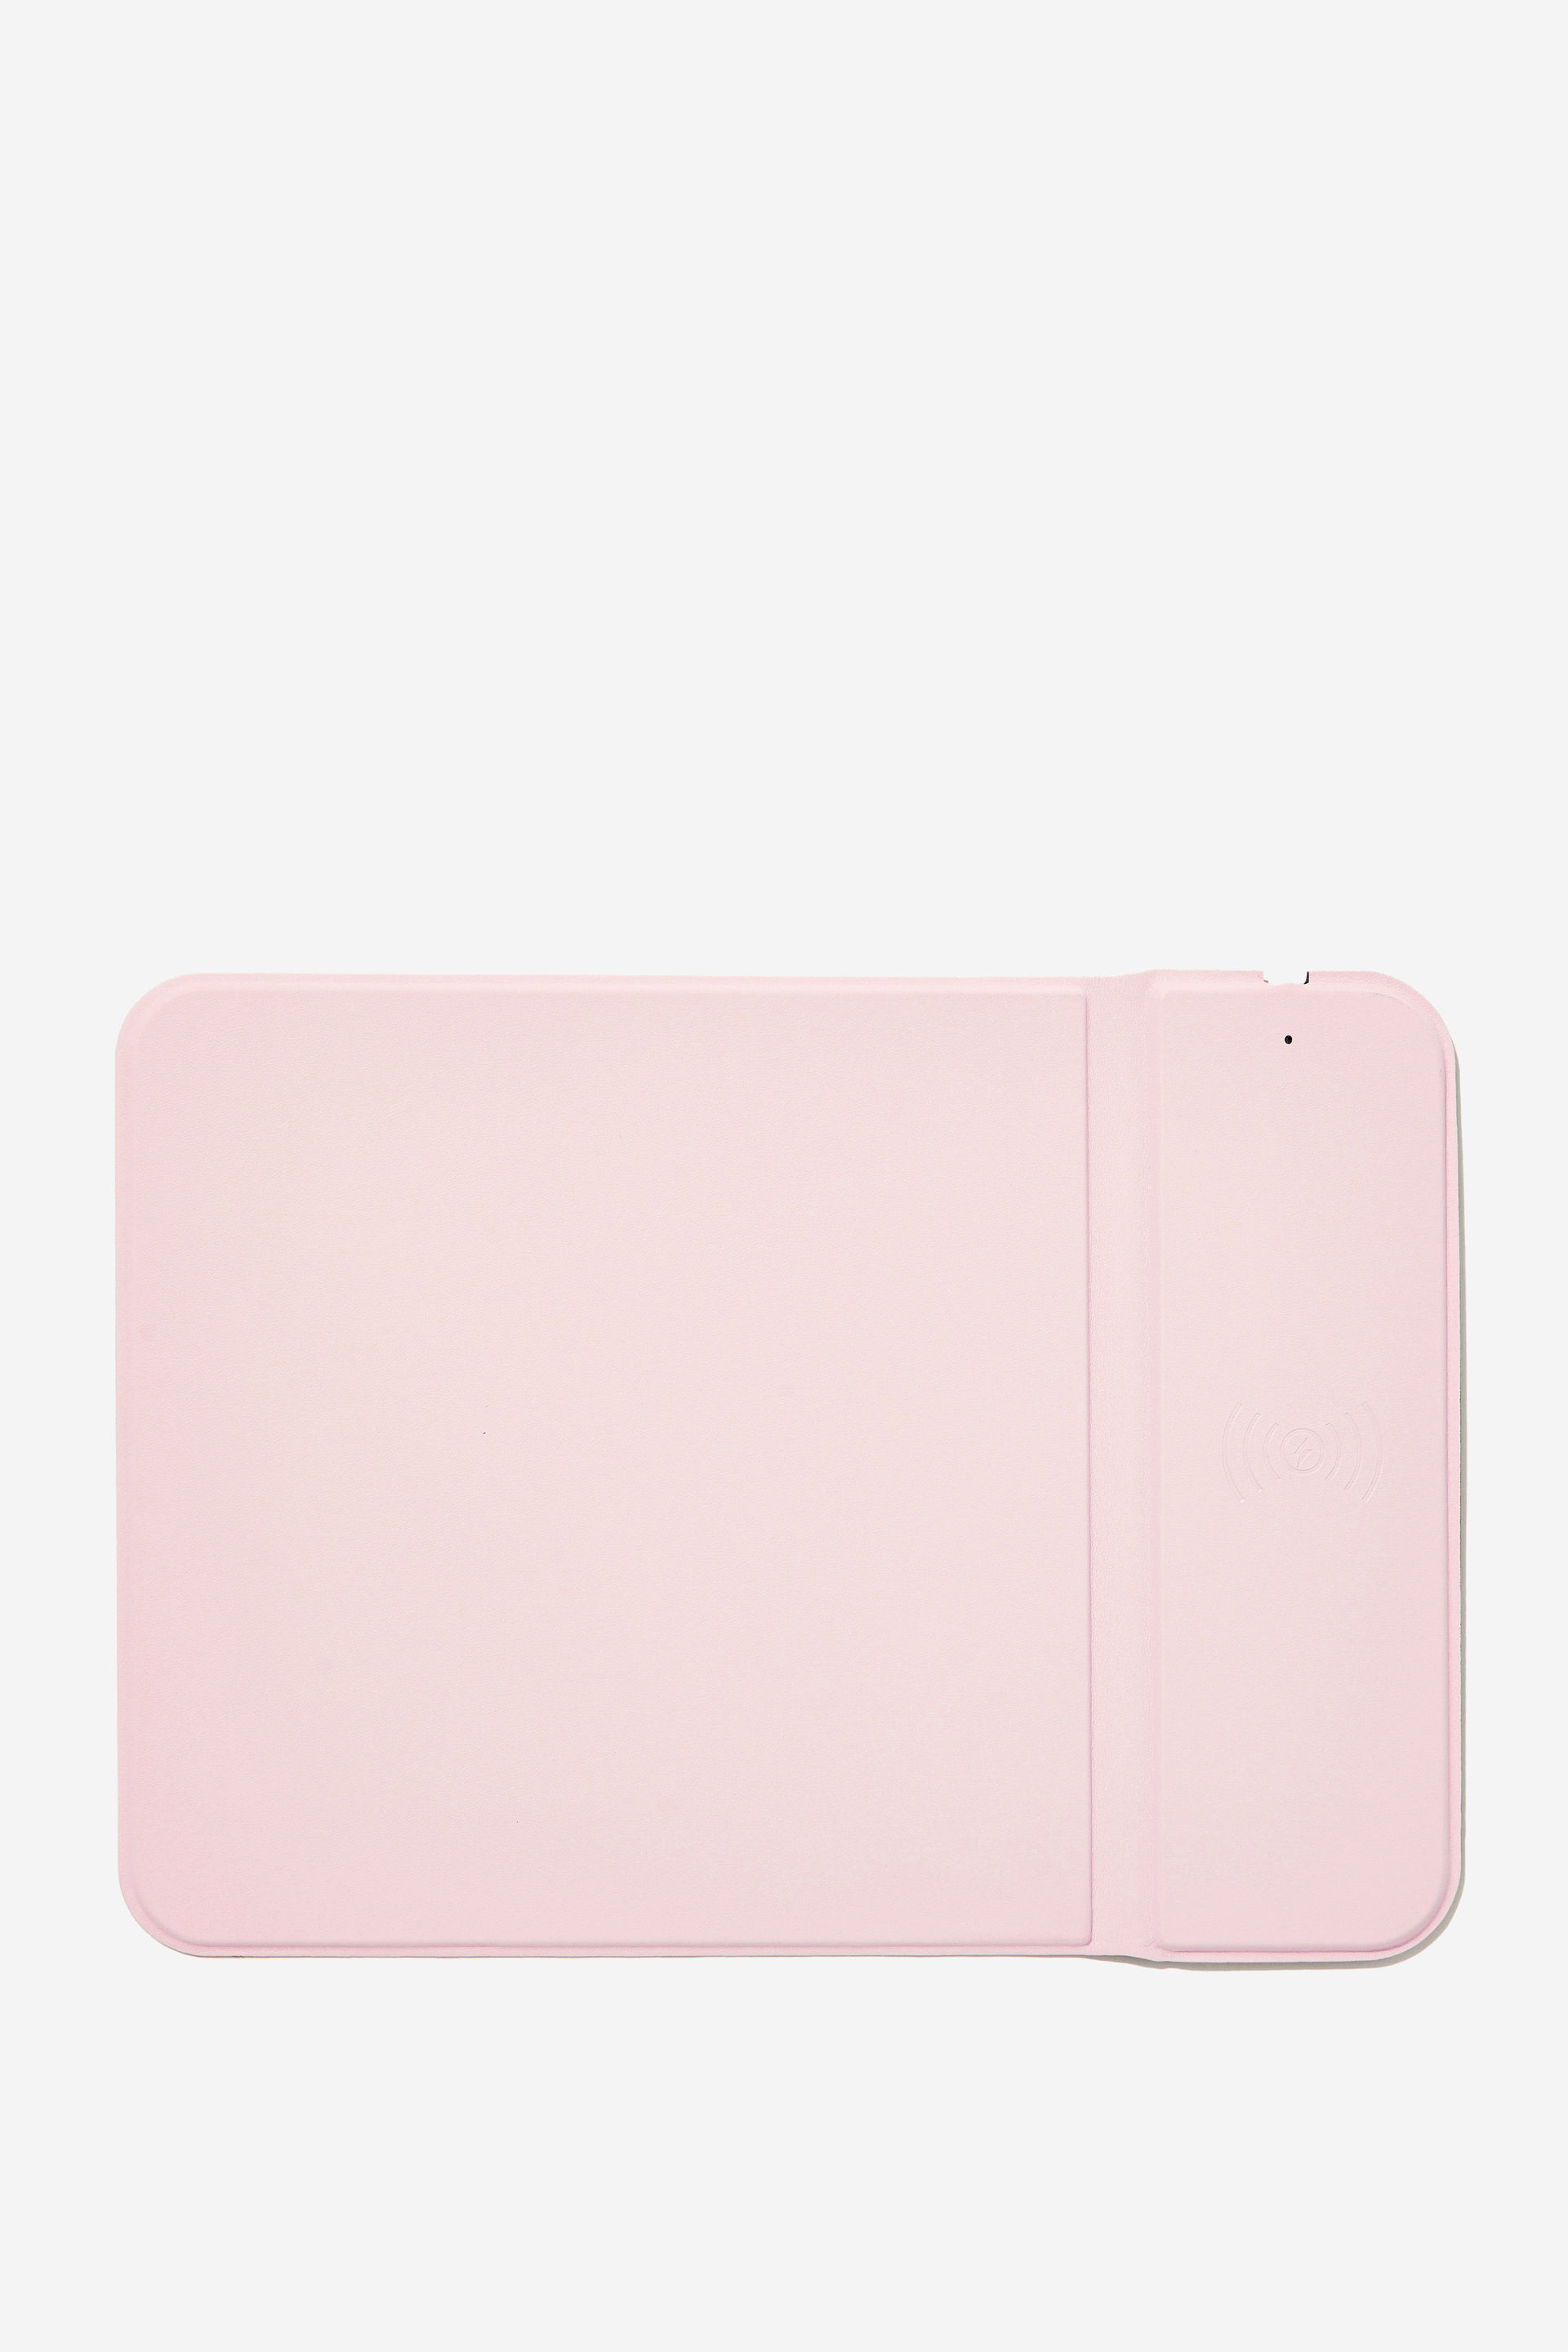 Typo - Wireless Charging Mouse Pad - Ballet blush